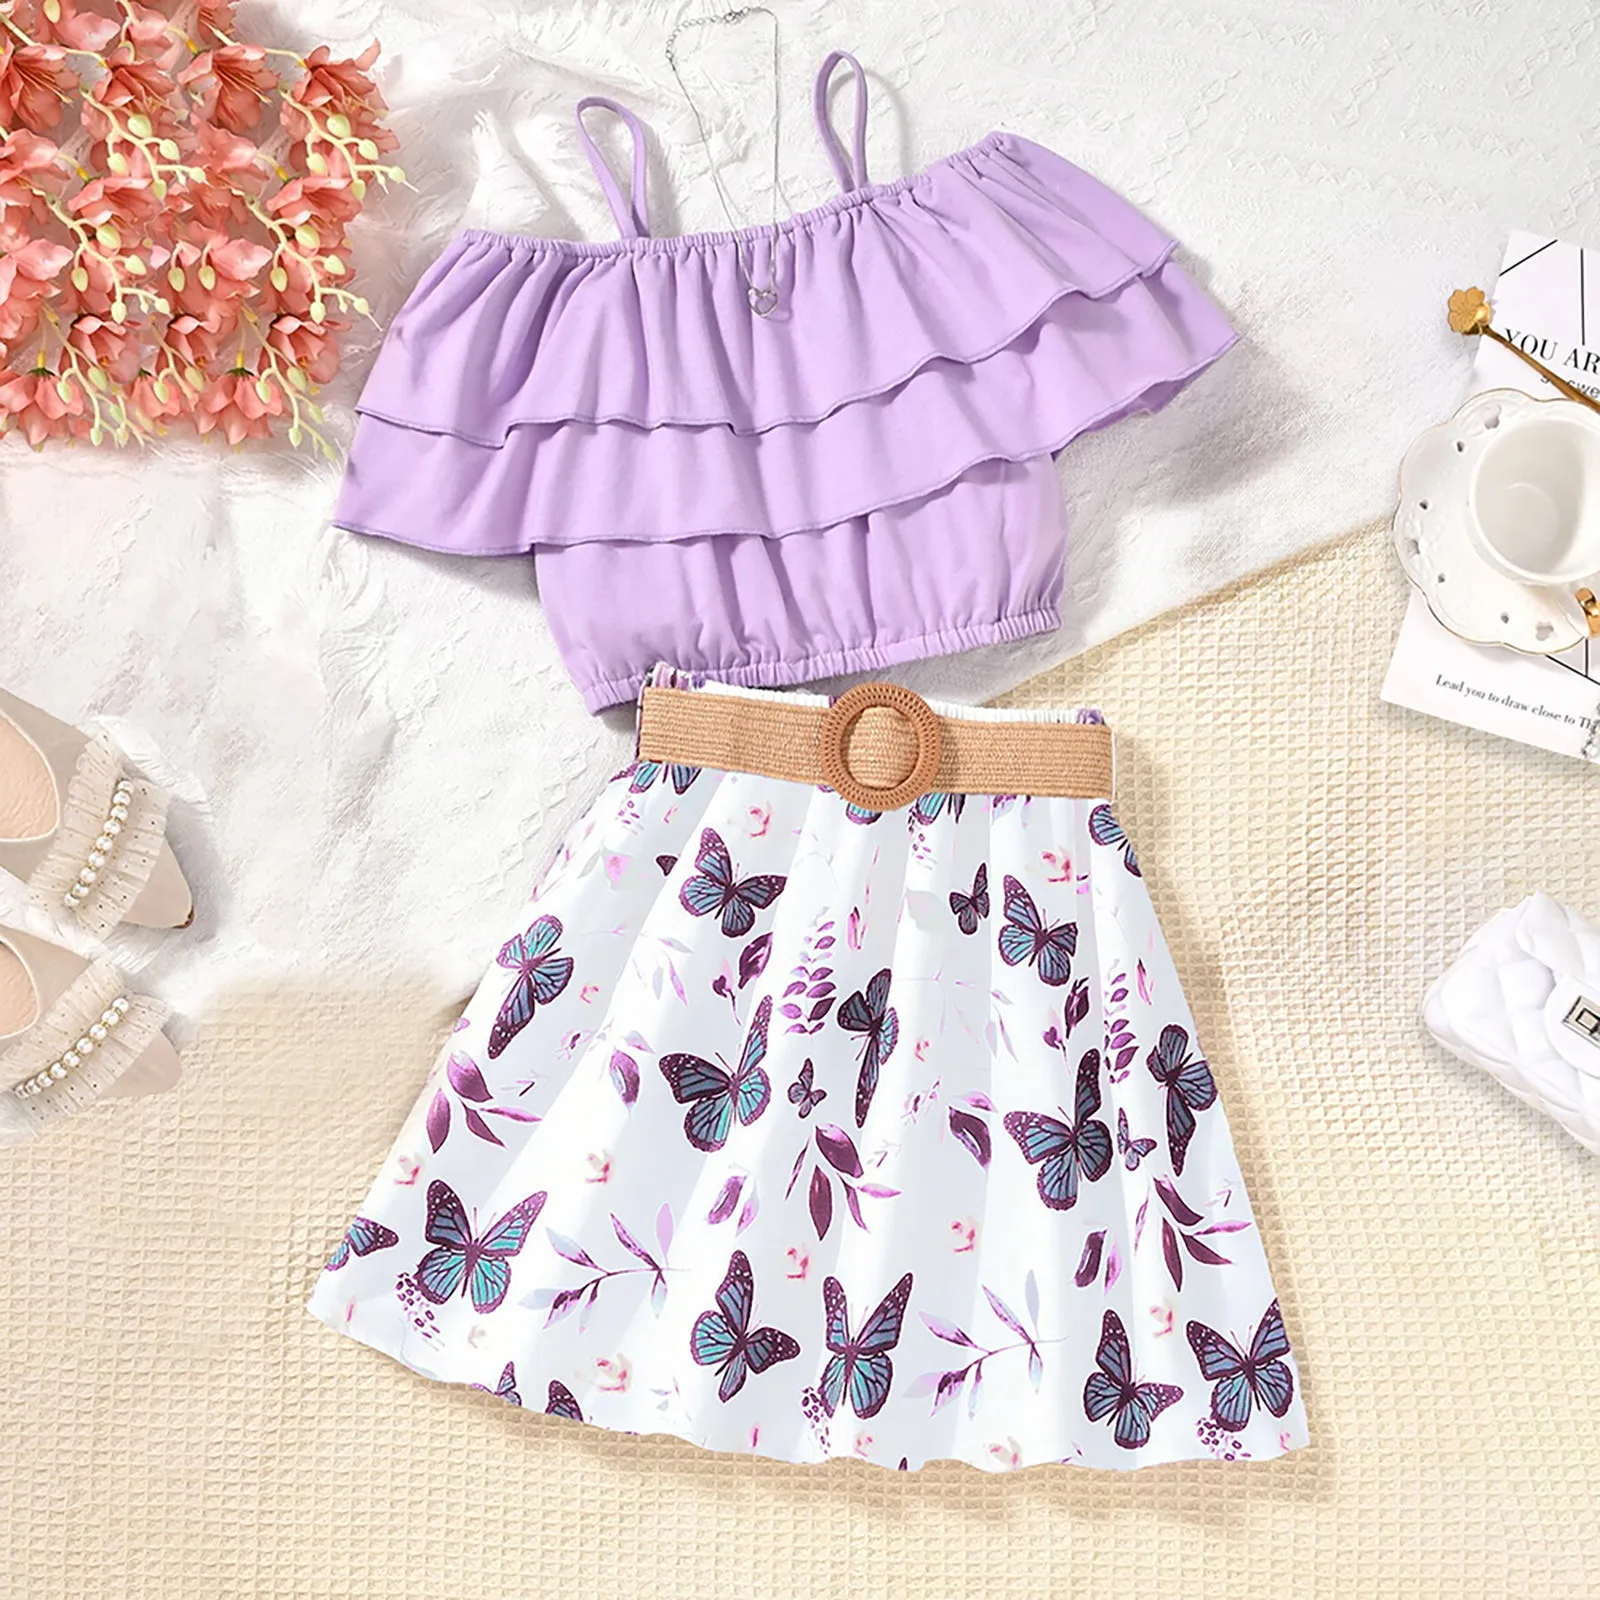 

Children Sleeveless Summer Clothes Sets For Girls 7-11 Years Ruffles Vest Tops Flowers Print Skirts Beach Wear Two Piece Outfits